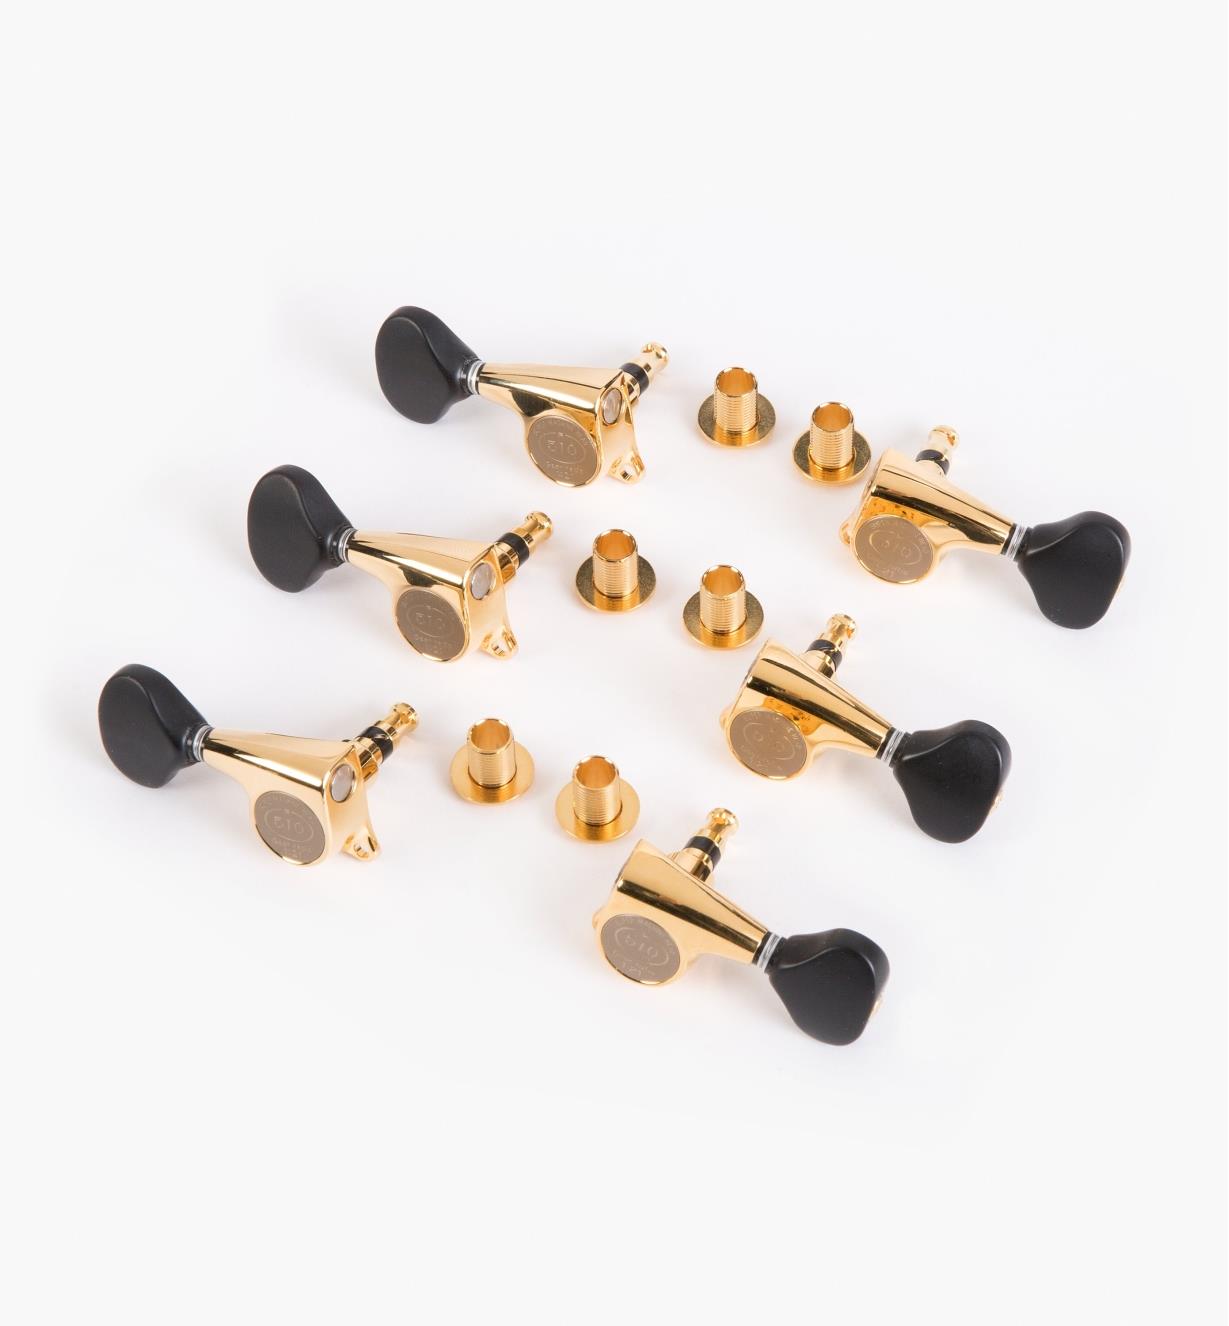 Gotoh Tuning Machines - Lee Valley Tools